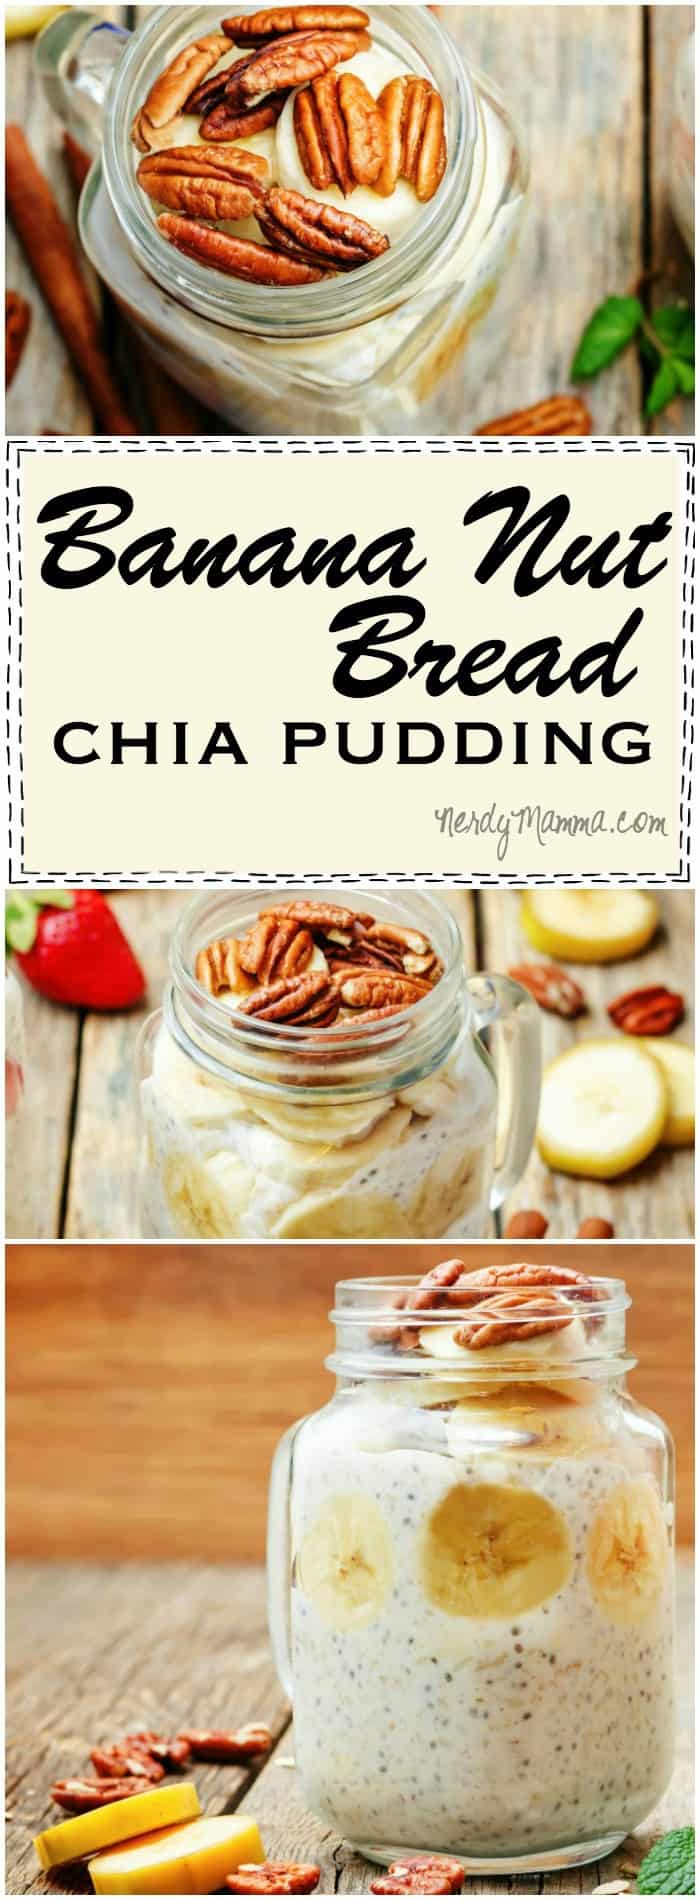 OMG! This recipe for banana nut bread chia breakfast pudding...it sounds so good. Definitely pinning so I can make it next week